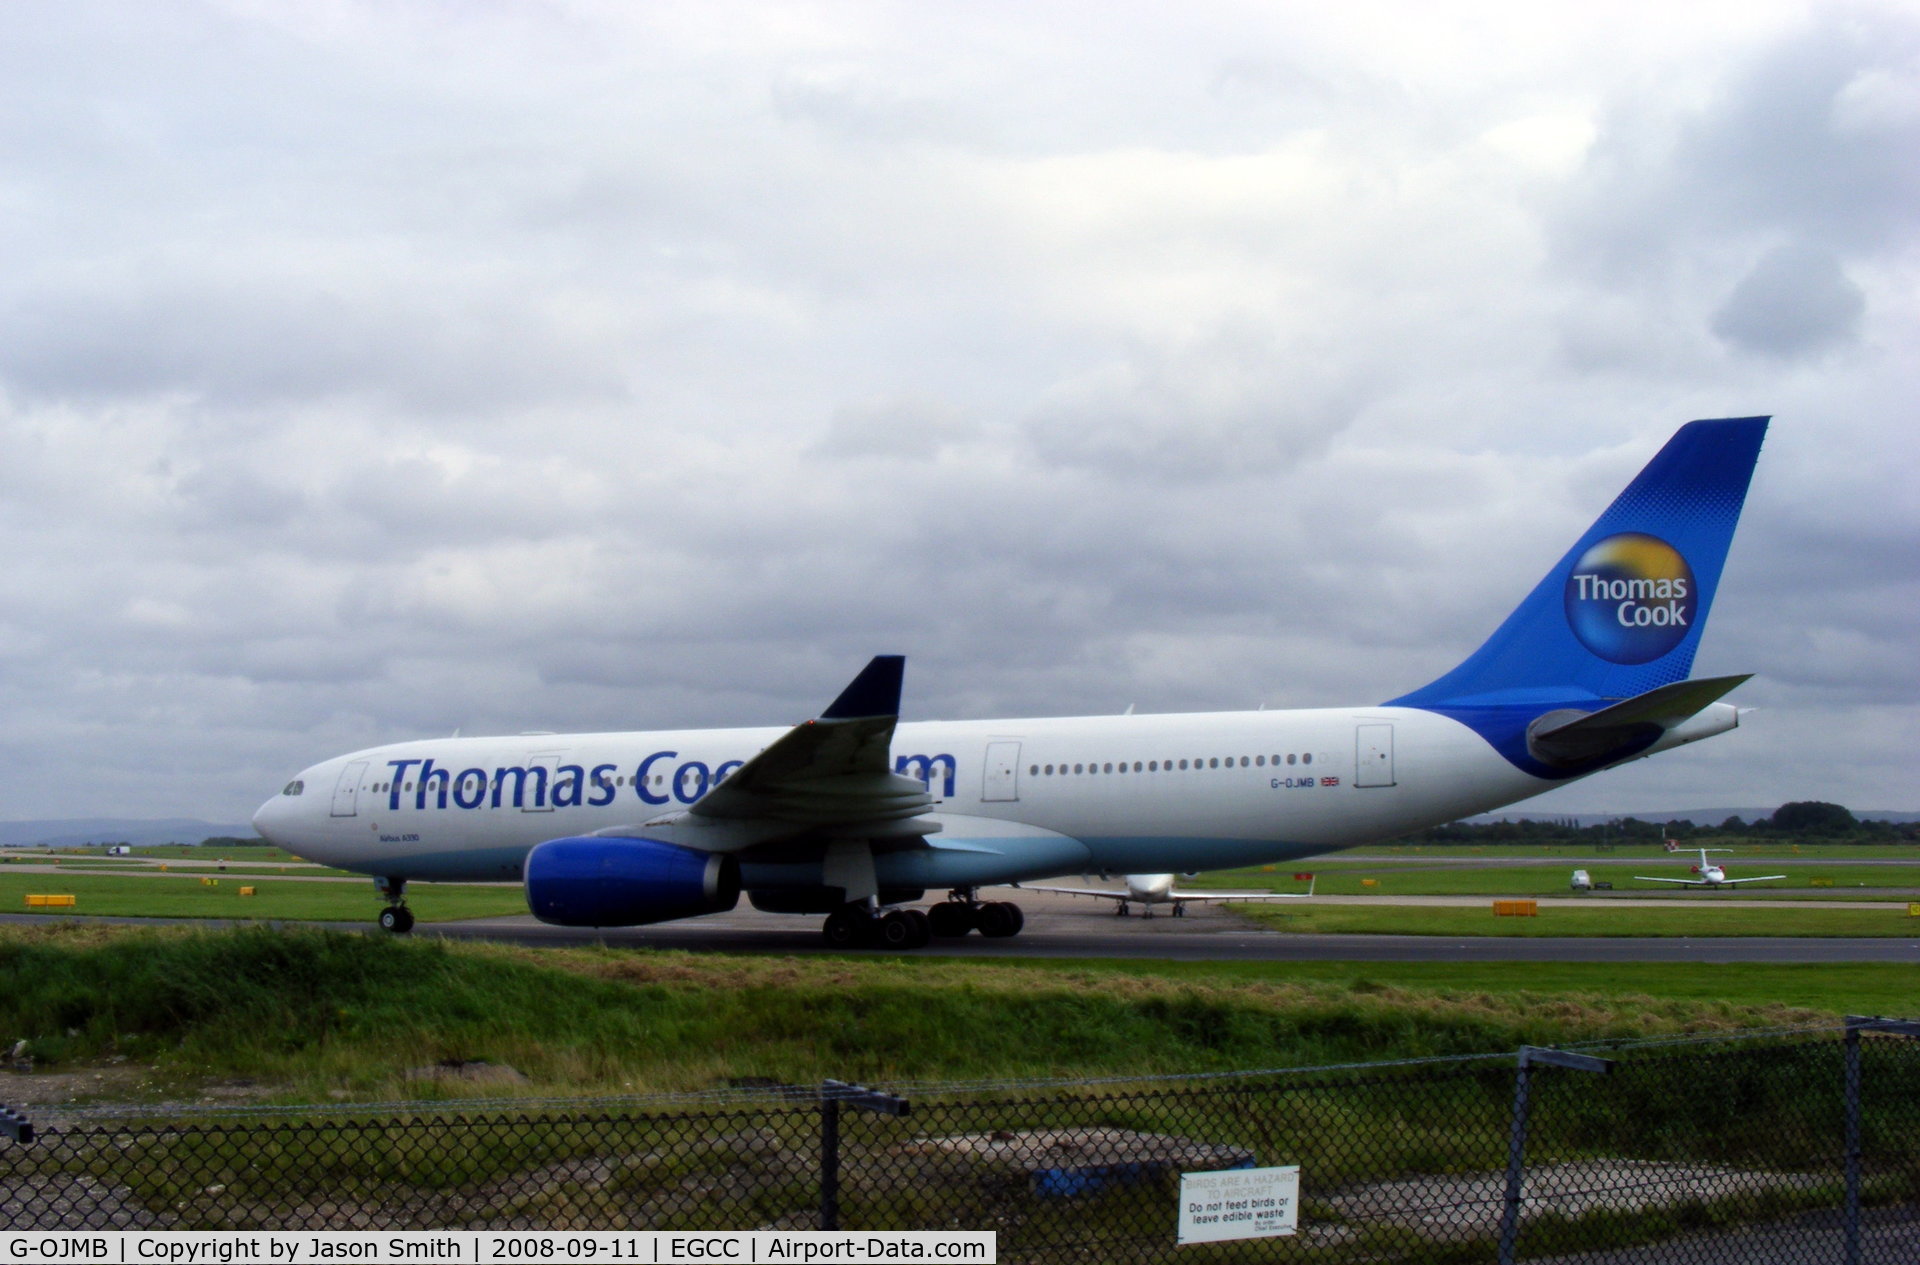 G-OJMB, 2001 Airbus A330-243 C/N 427, Taxing To The Terminal At EGCC